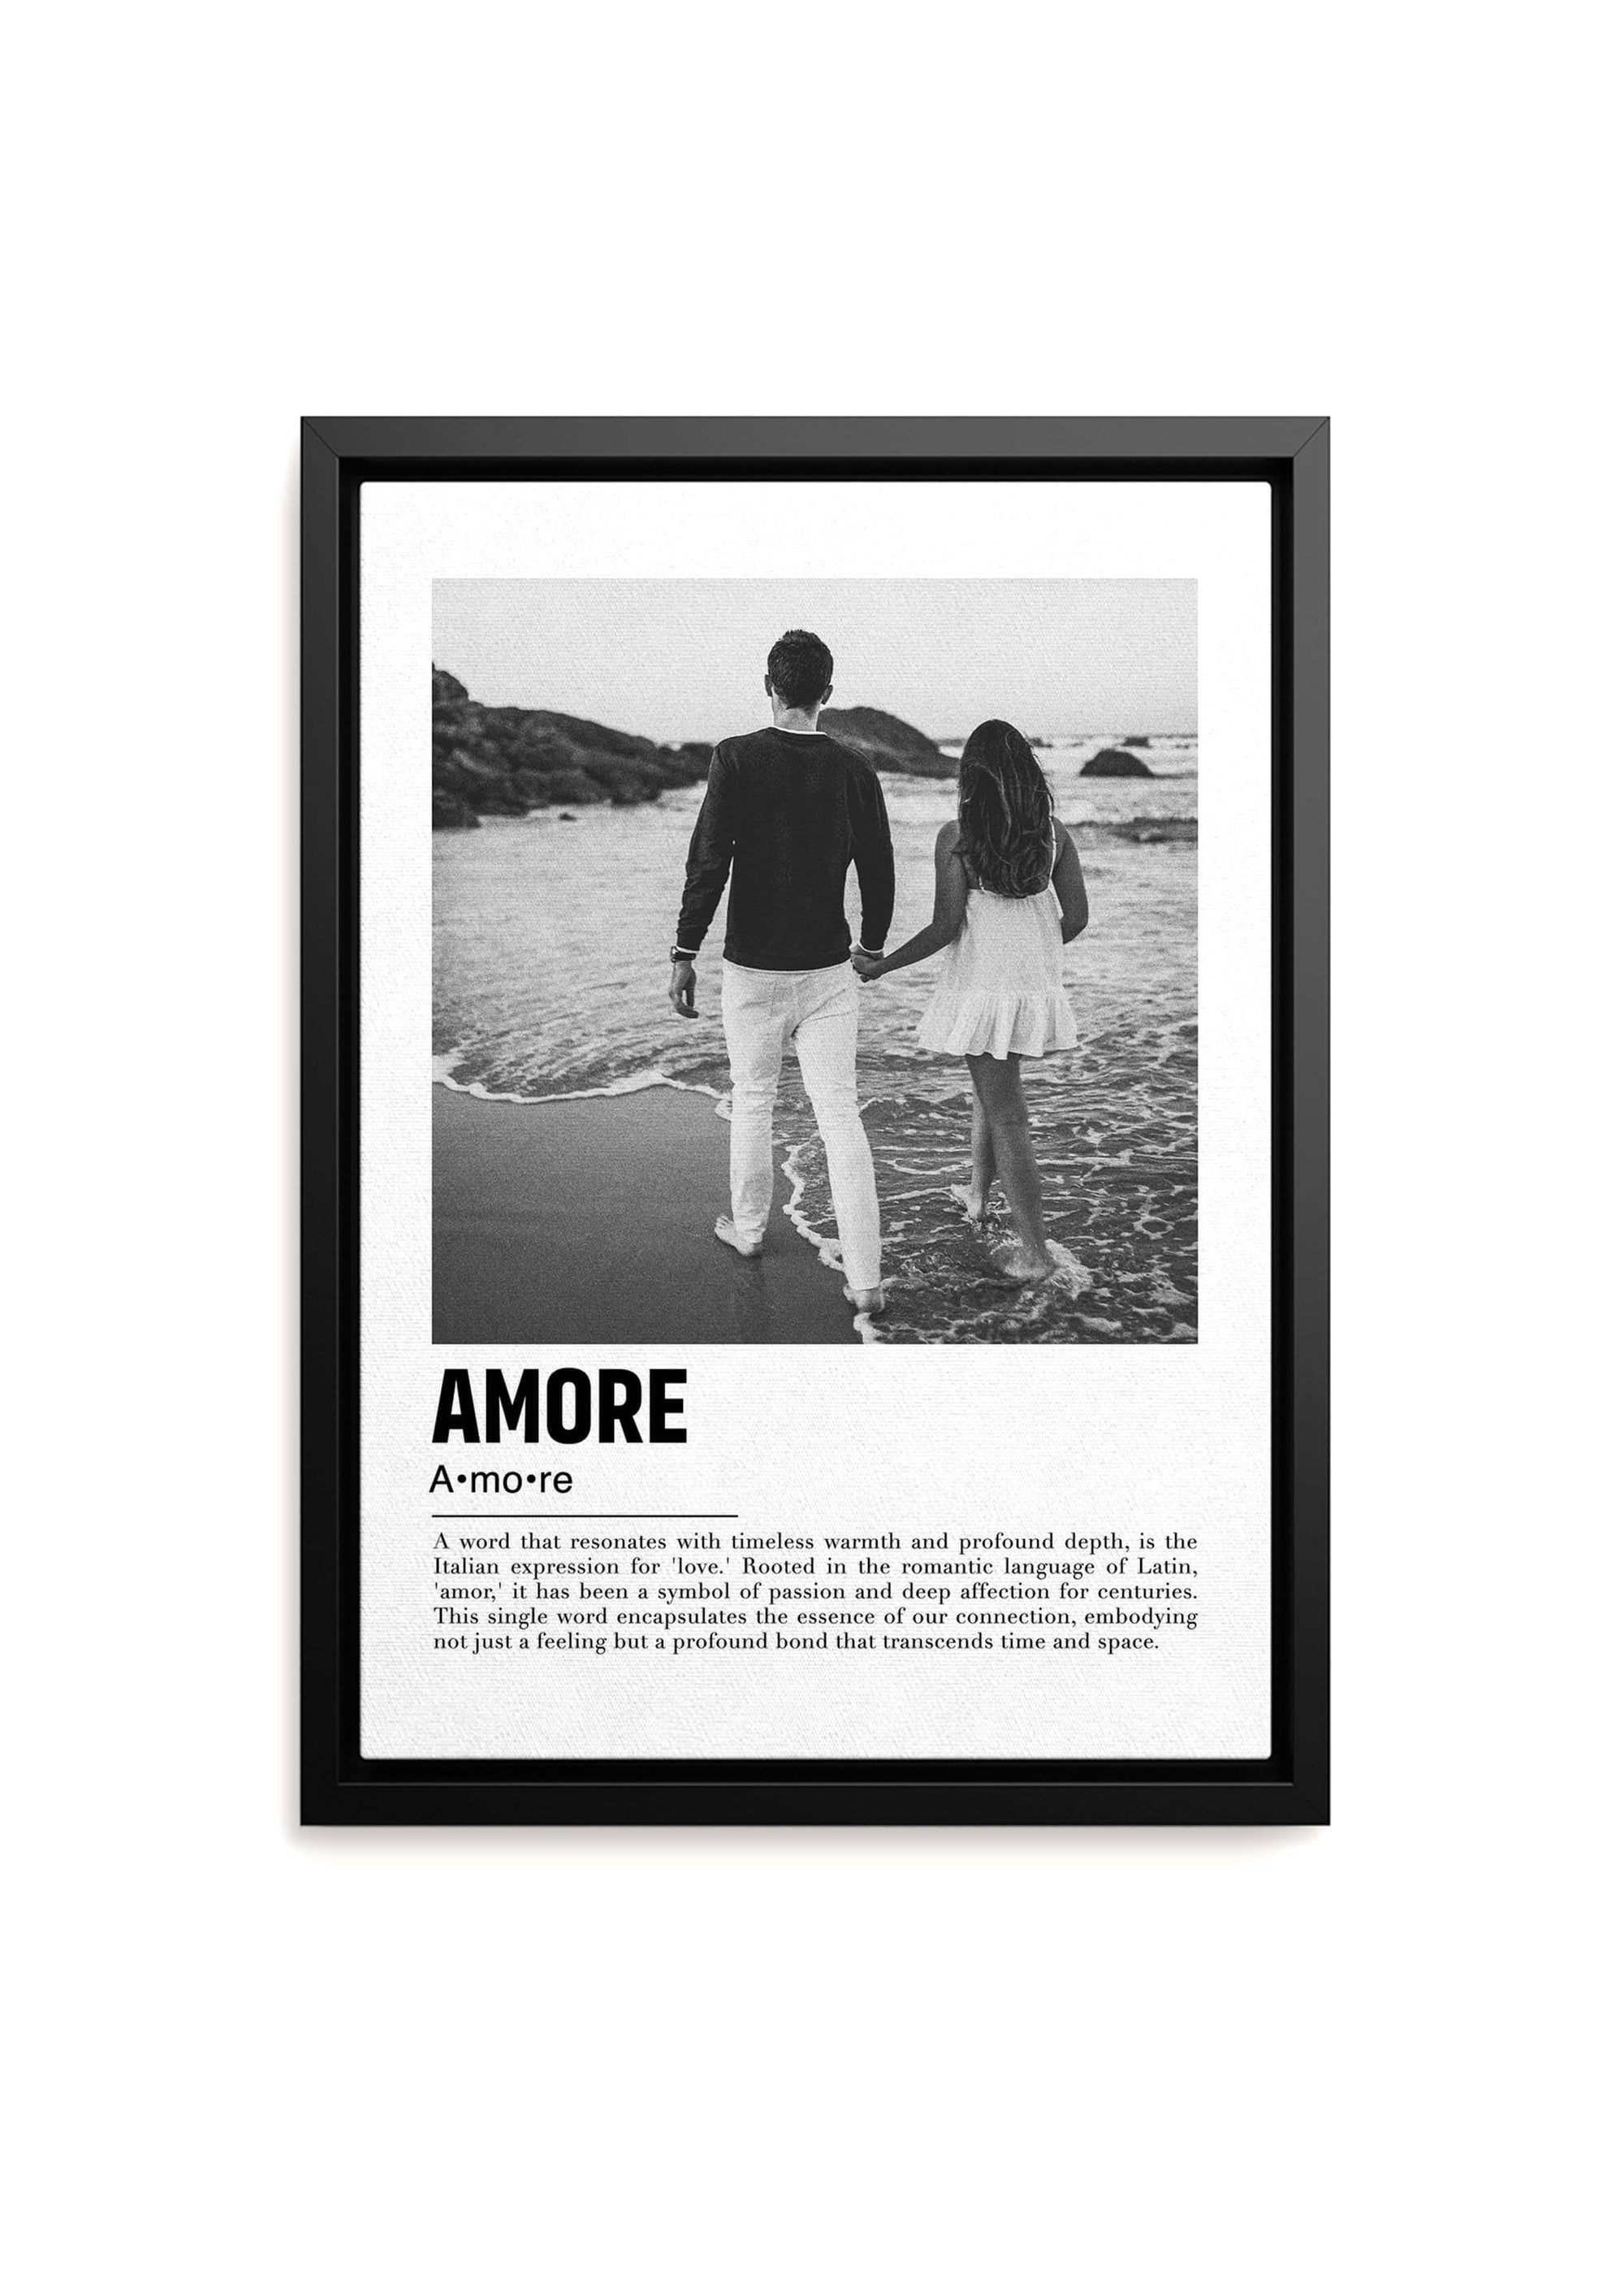 Anniversary gift of a personalized photo of a couple walking on a beach in black and white with a custom message on black framed canvas on a white background.